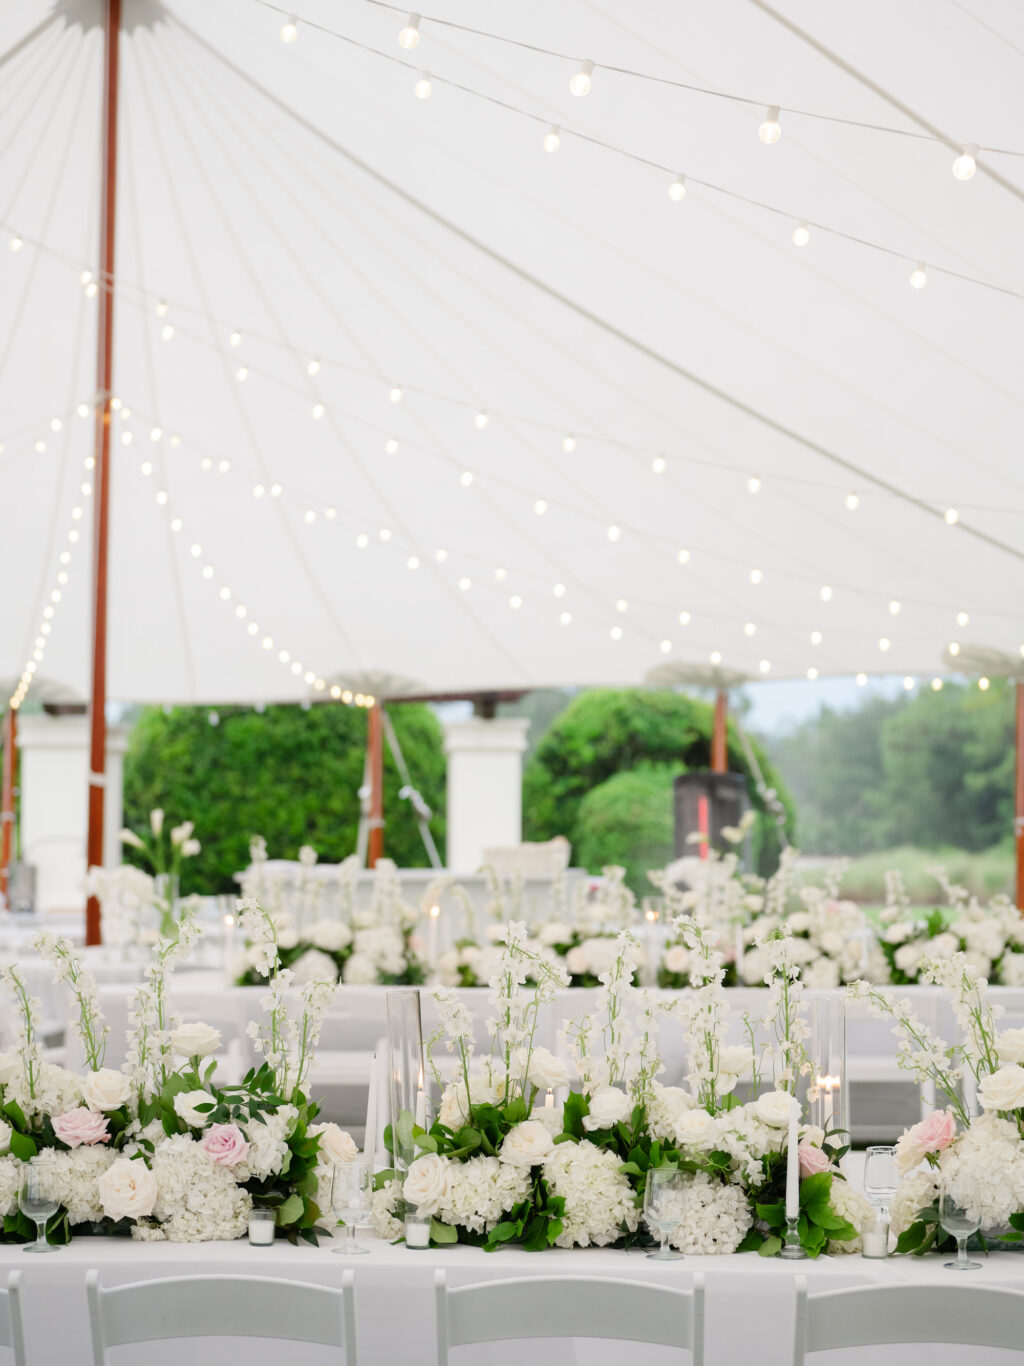 Timeless White Stock, Garden Roses, and Hydrangeas Feasting Table Centerpieces | Sailcloth Tent | Timeless Wedding Reception Inspiration | Sarasota Venue The Concession Golf Club